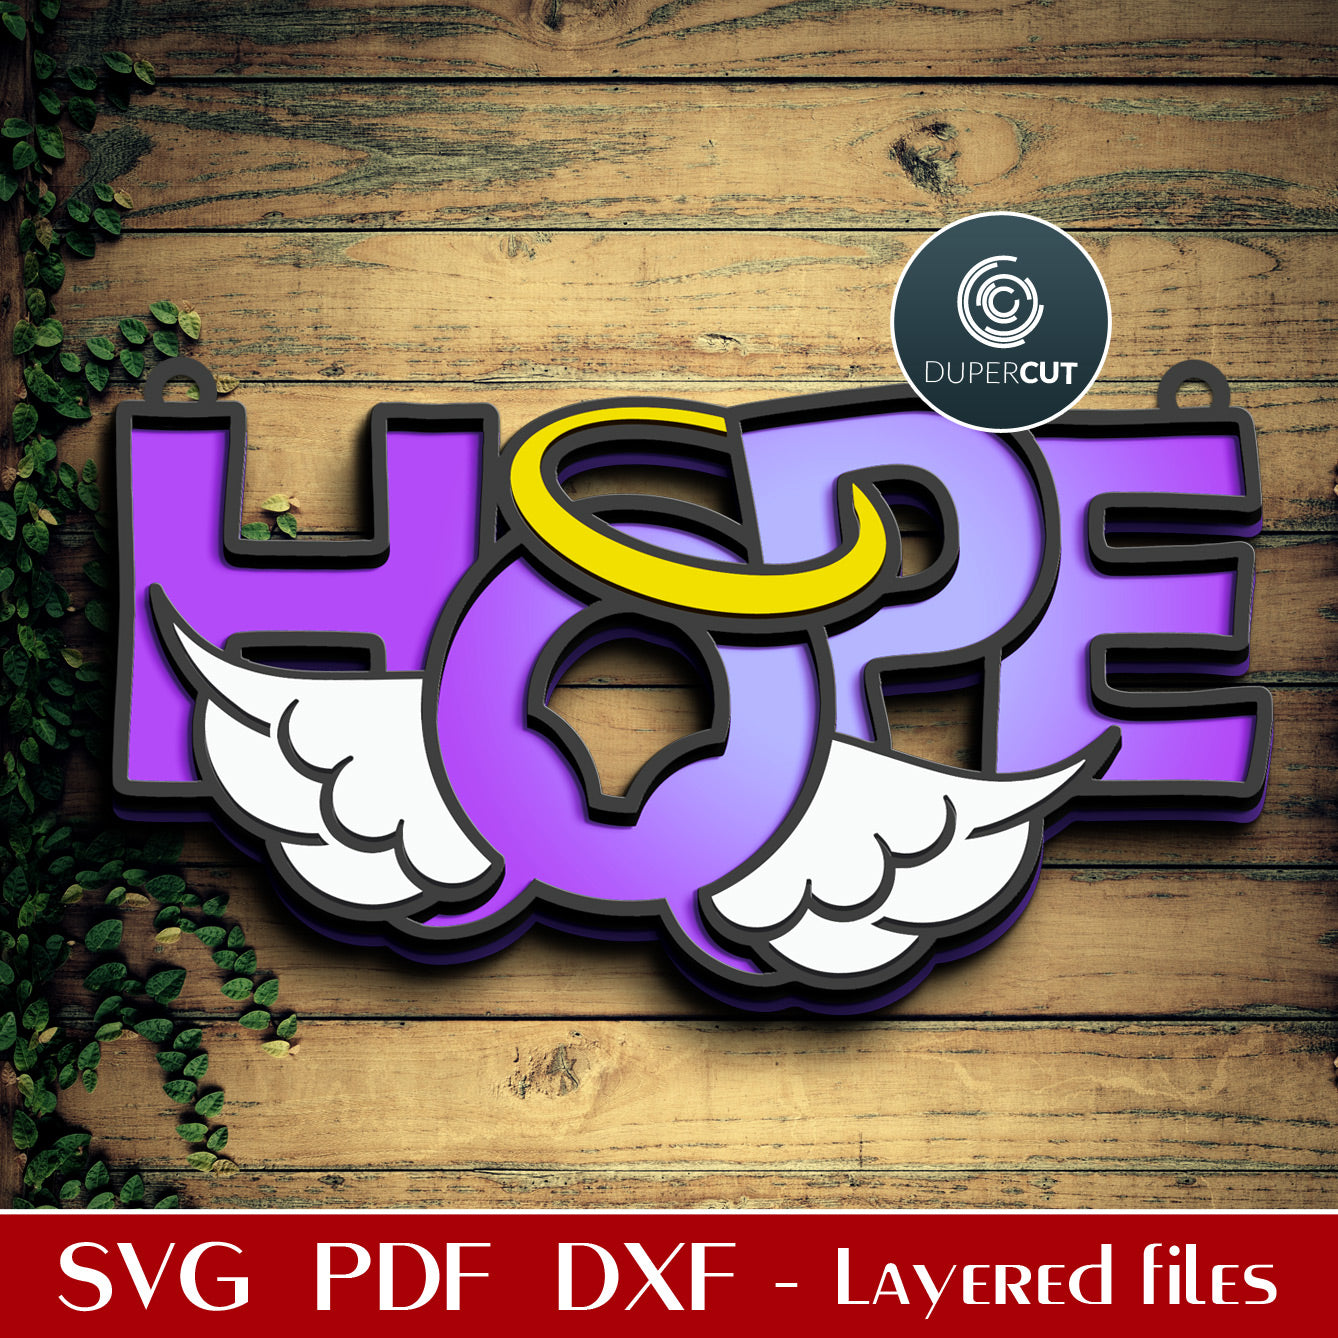 Hope sign with angel wings - SVG DXF layered vector cutting files for Glowforge, Cricut, Silhouette, wood cutting by DuperCut